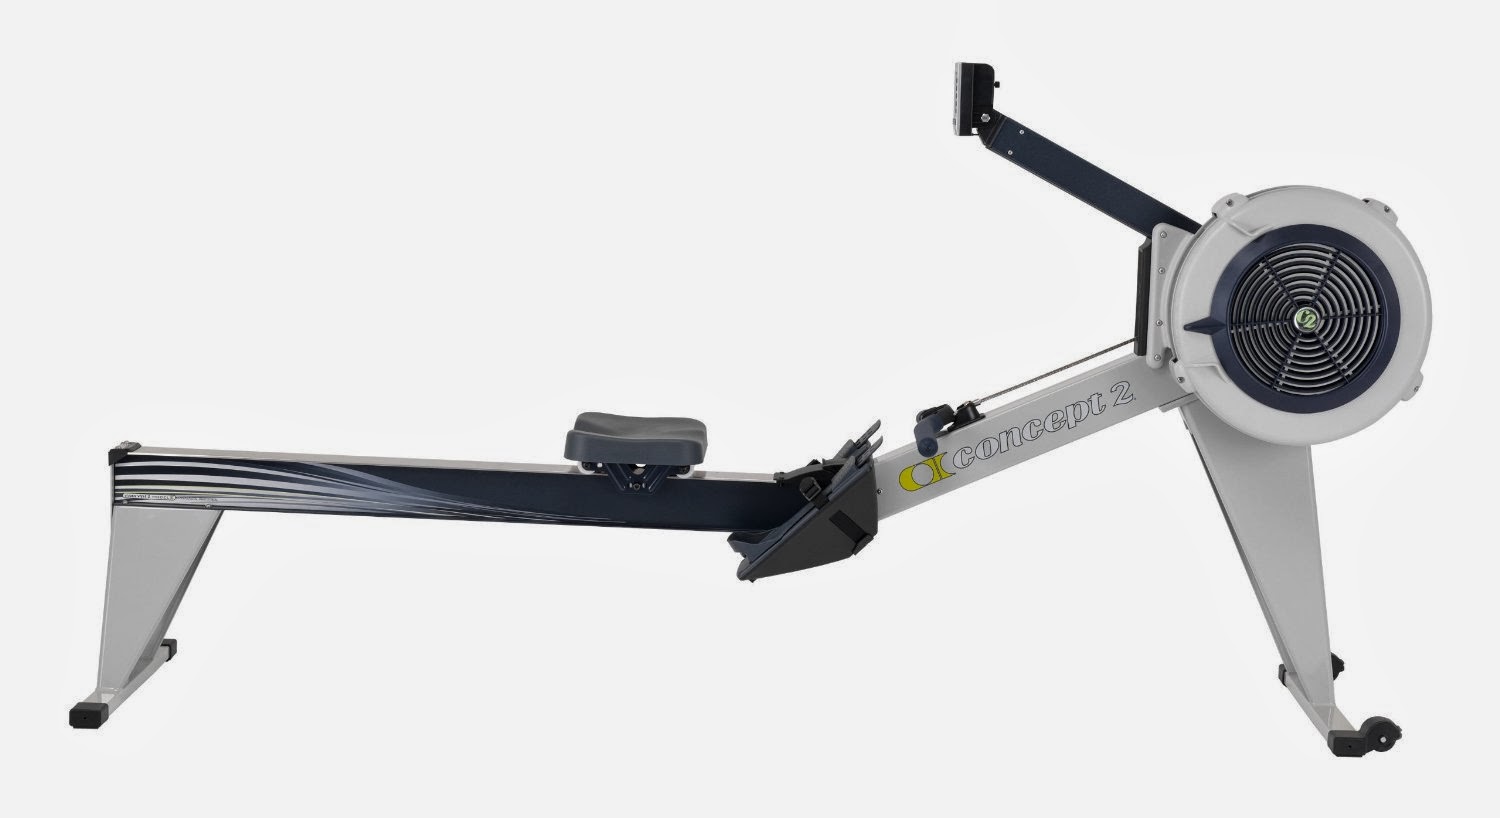 Concept2 Model E Indoor Rowing Machine, picture, review features & specifications